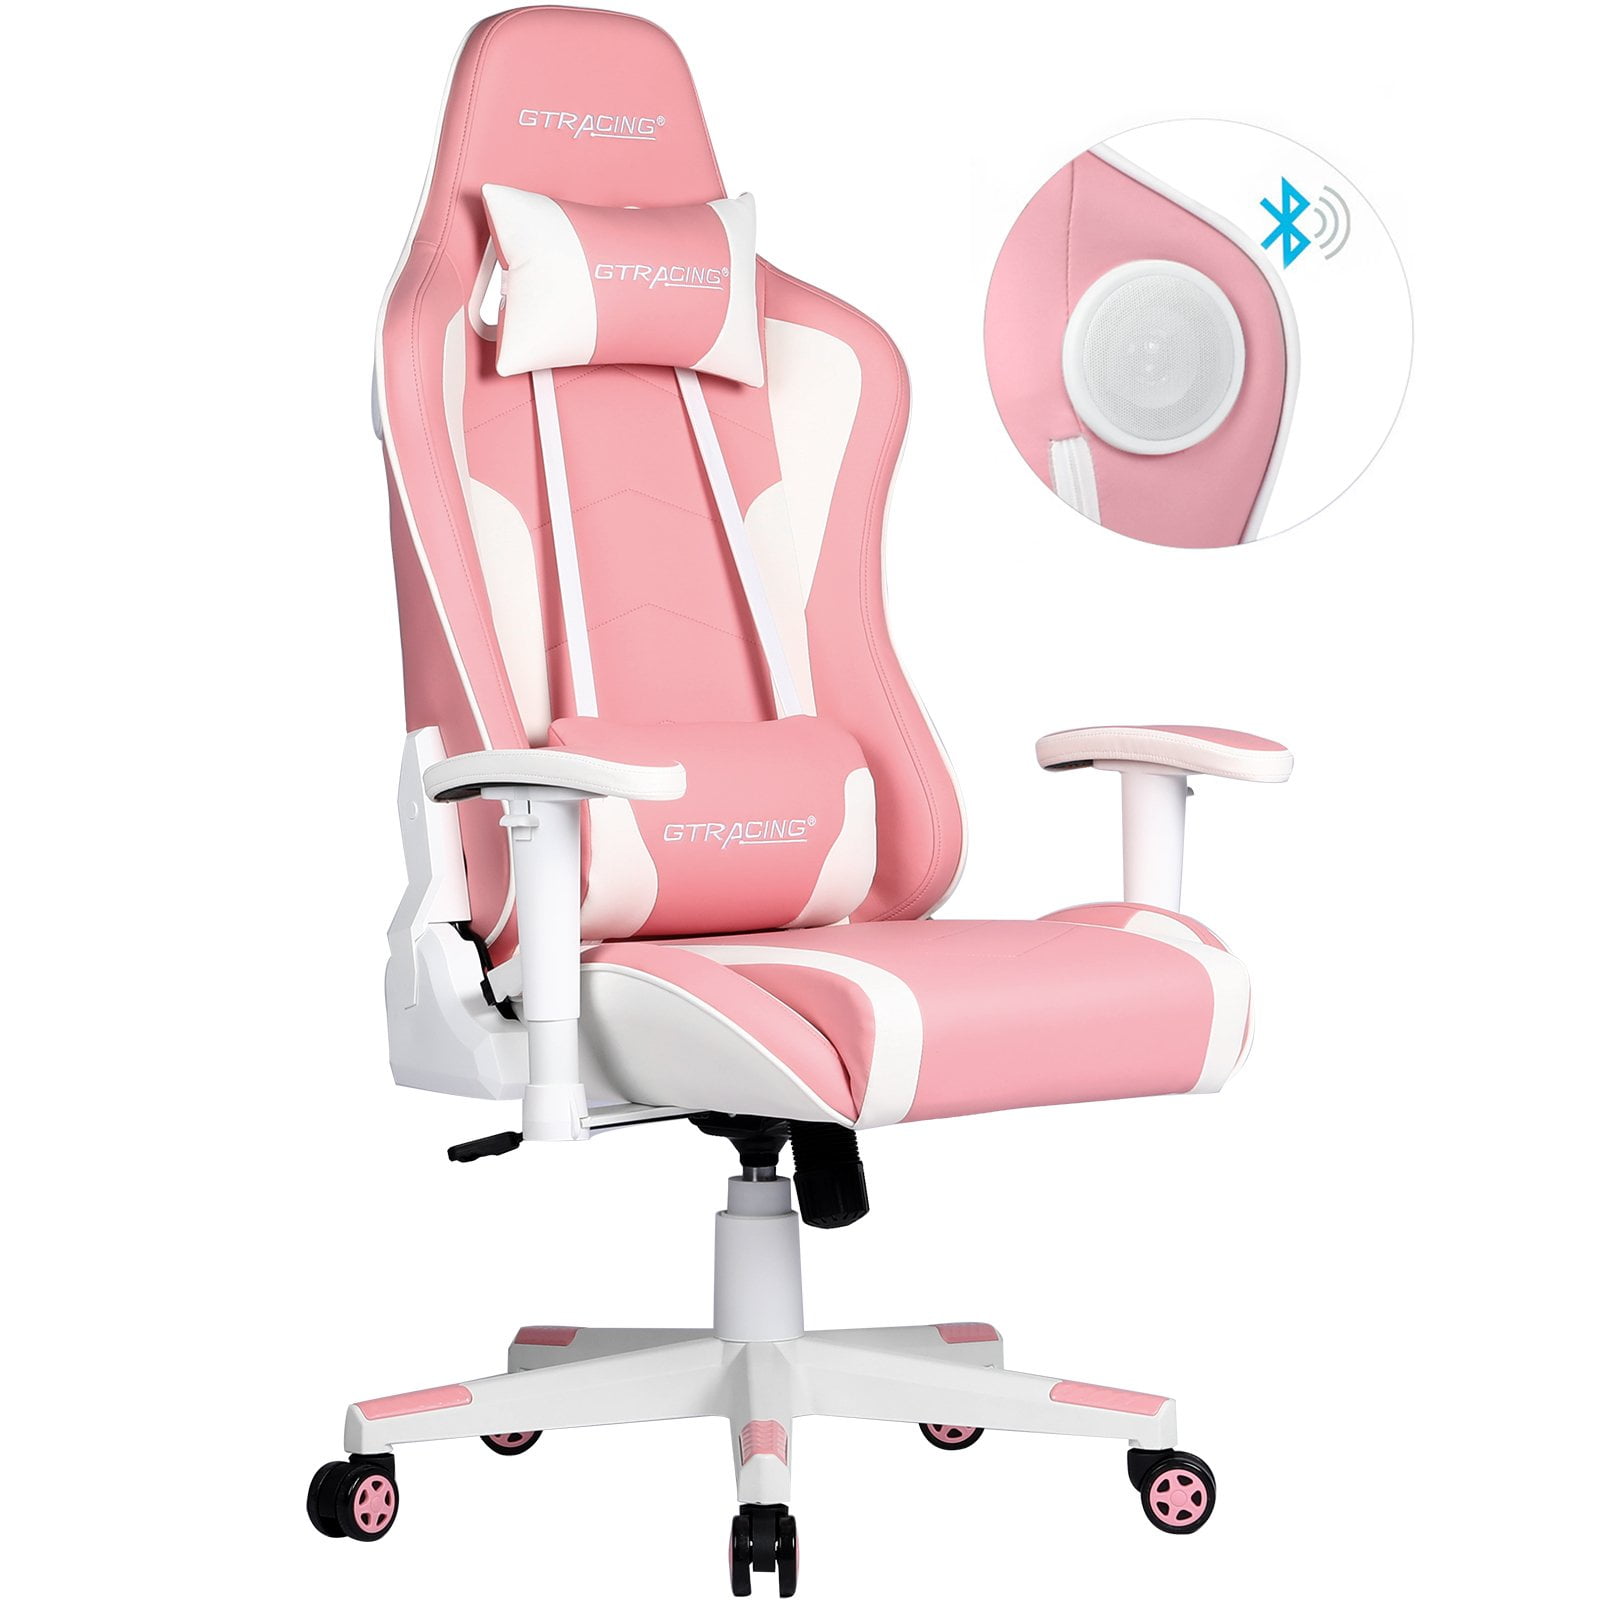 Gtracing Gaming Chair Office Chair With Speakers Bluetooth In Home Computer Chair Pink Walmart Com Walmart Com